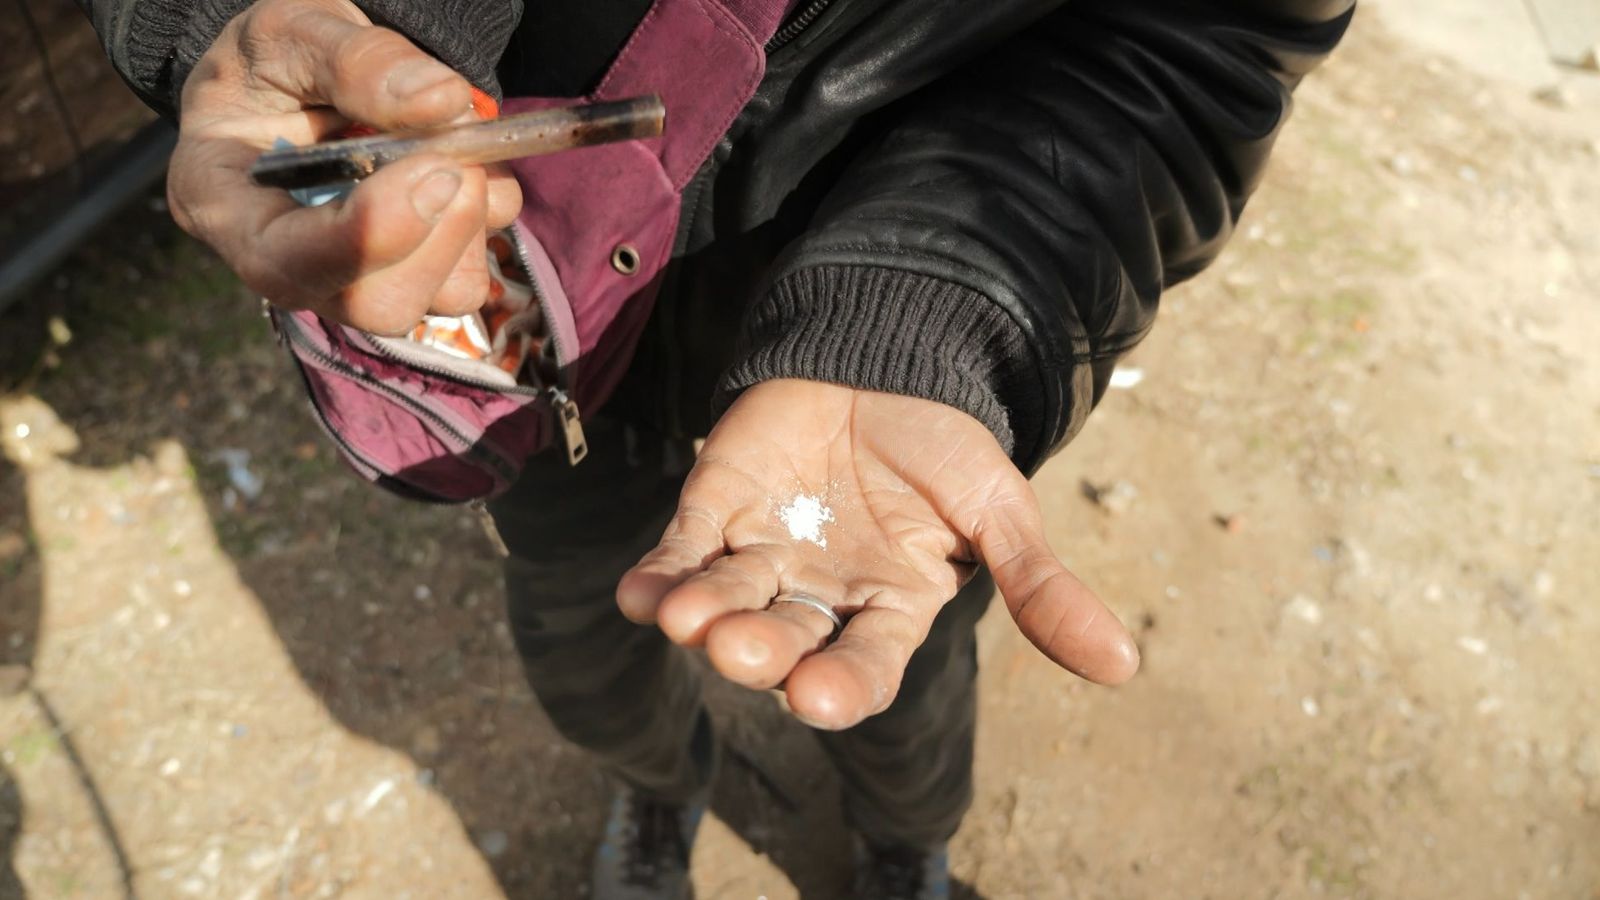 'Tranq': The street drug designated as an 'emerging threat to the US' by the White House